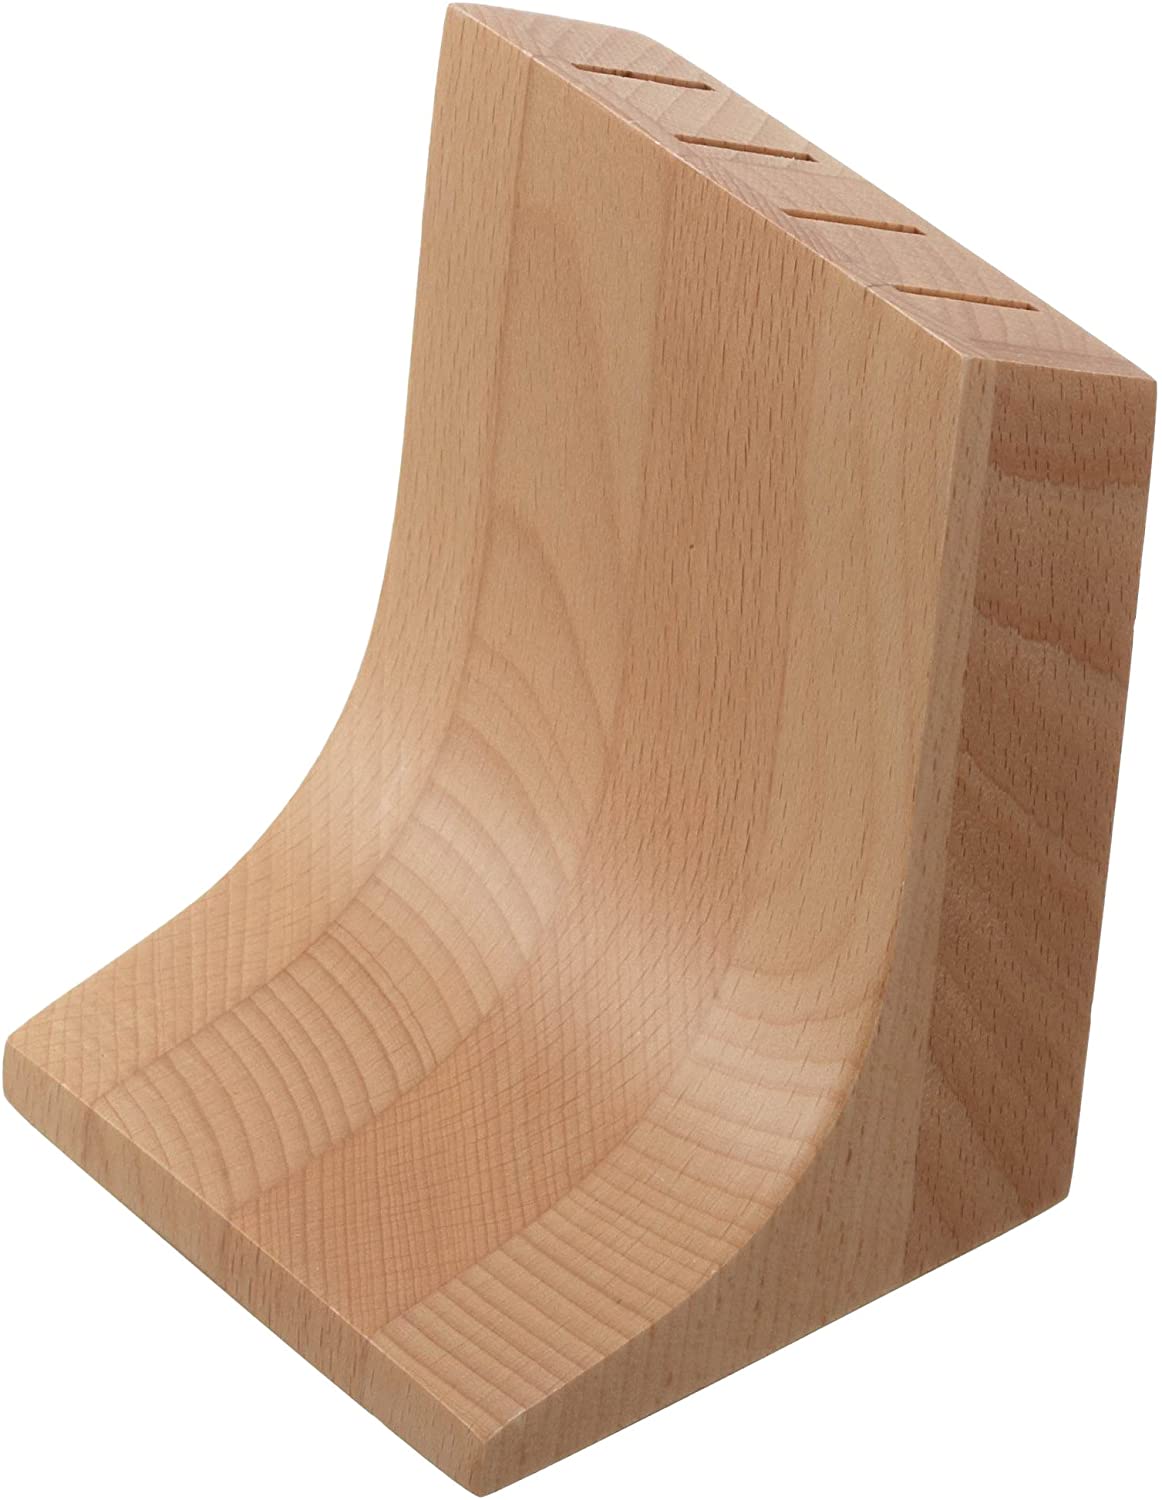 Alessi Steak Knife Block Made From Beech Wood